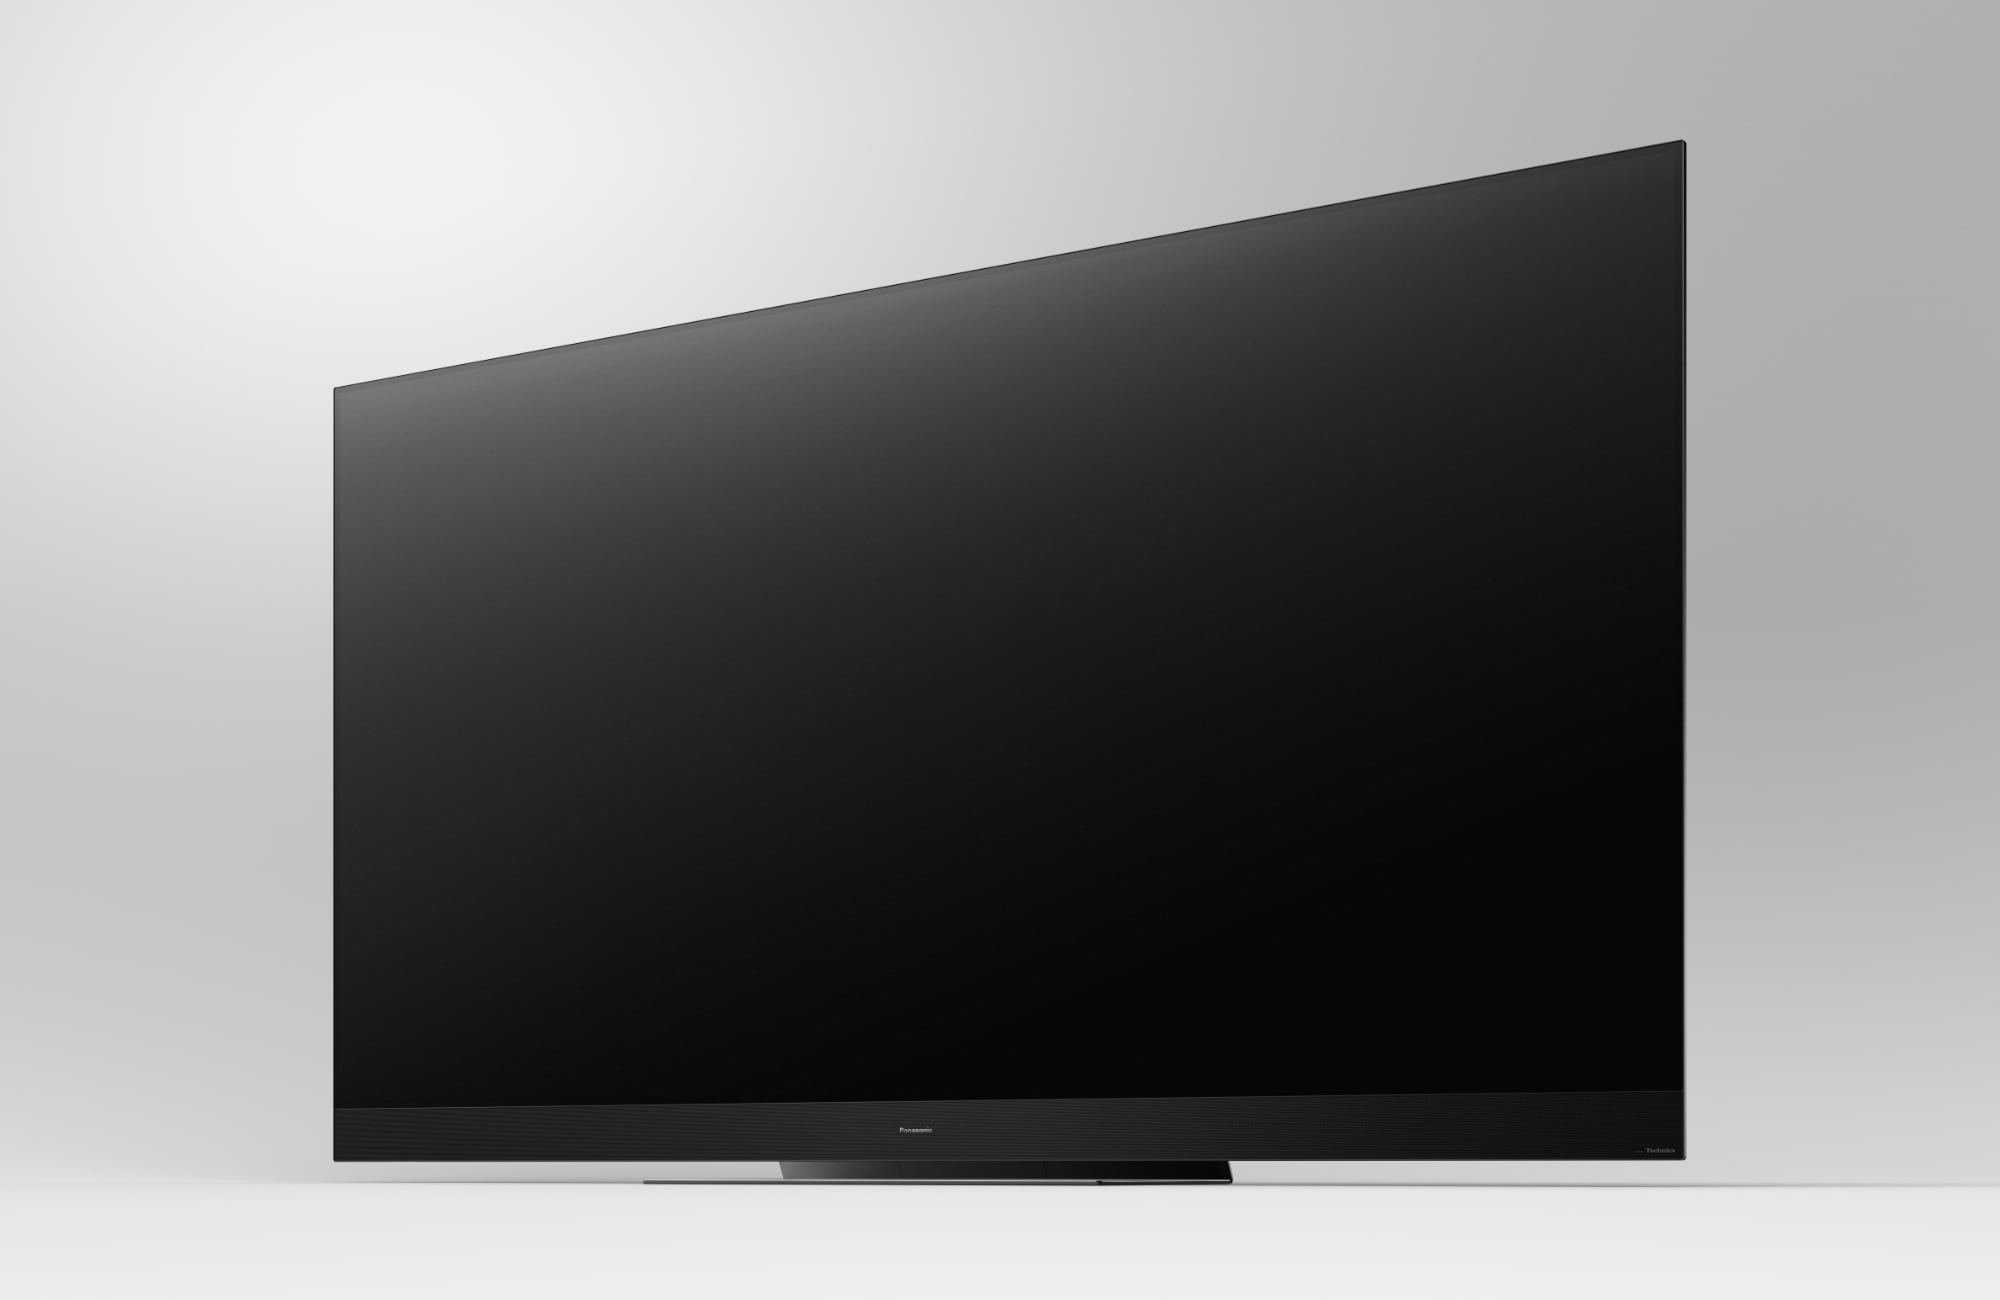 Xiaomi launches Android TV on a stick with HD review - FlatpanelsHD